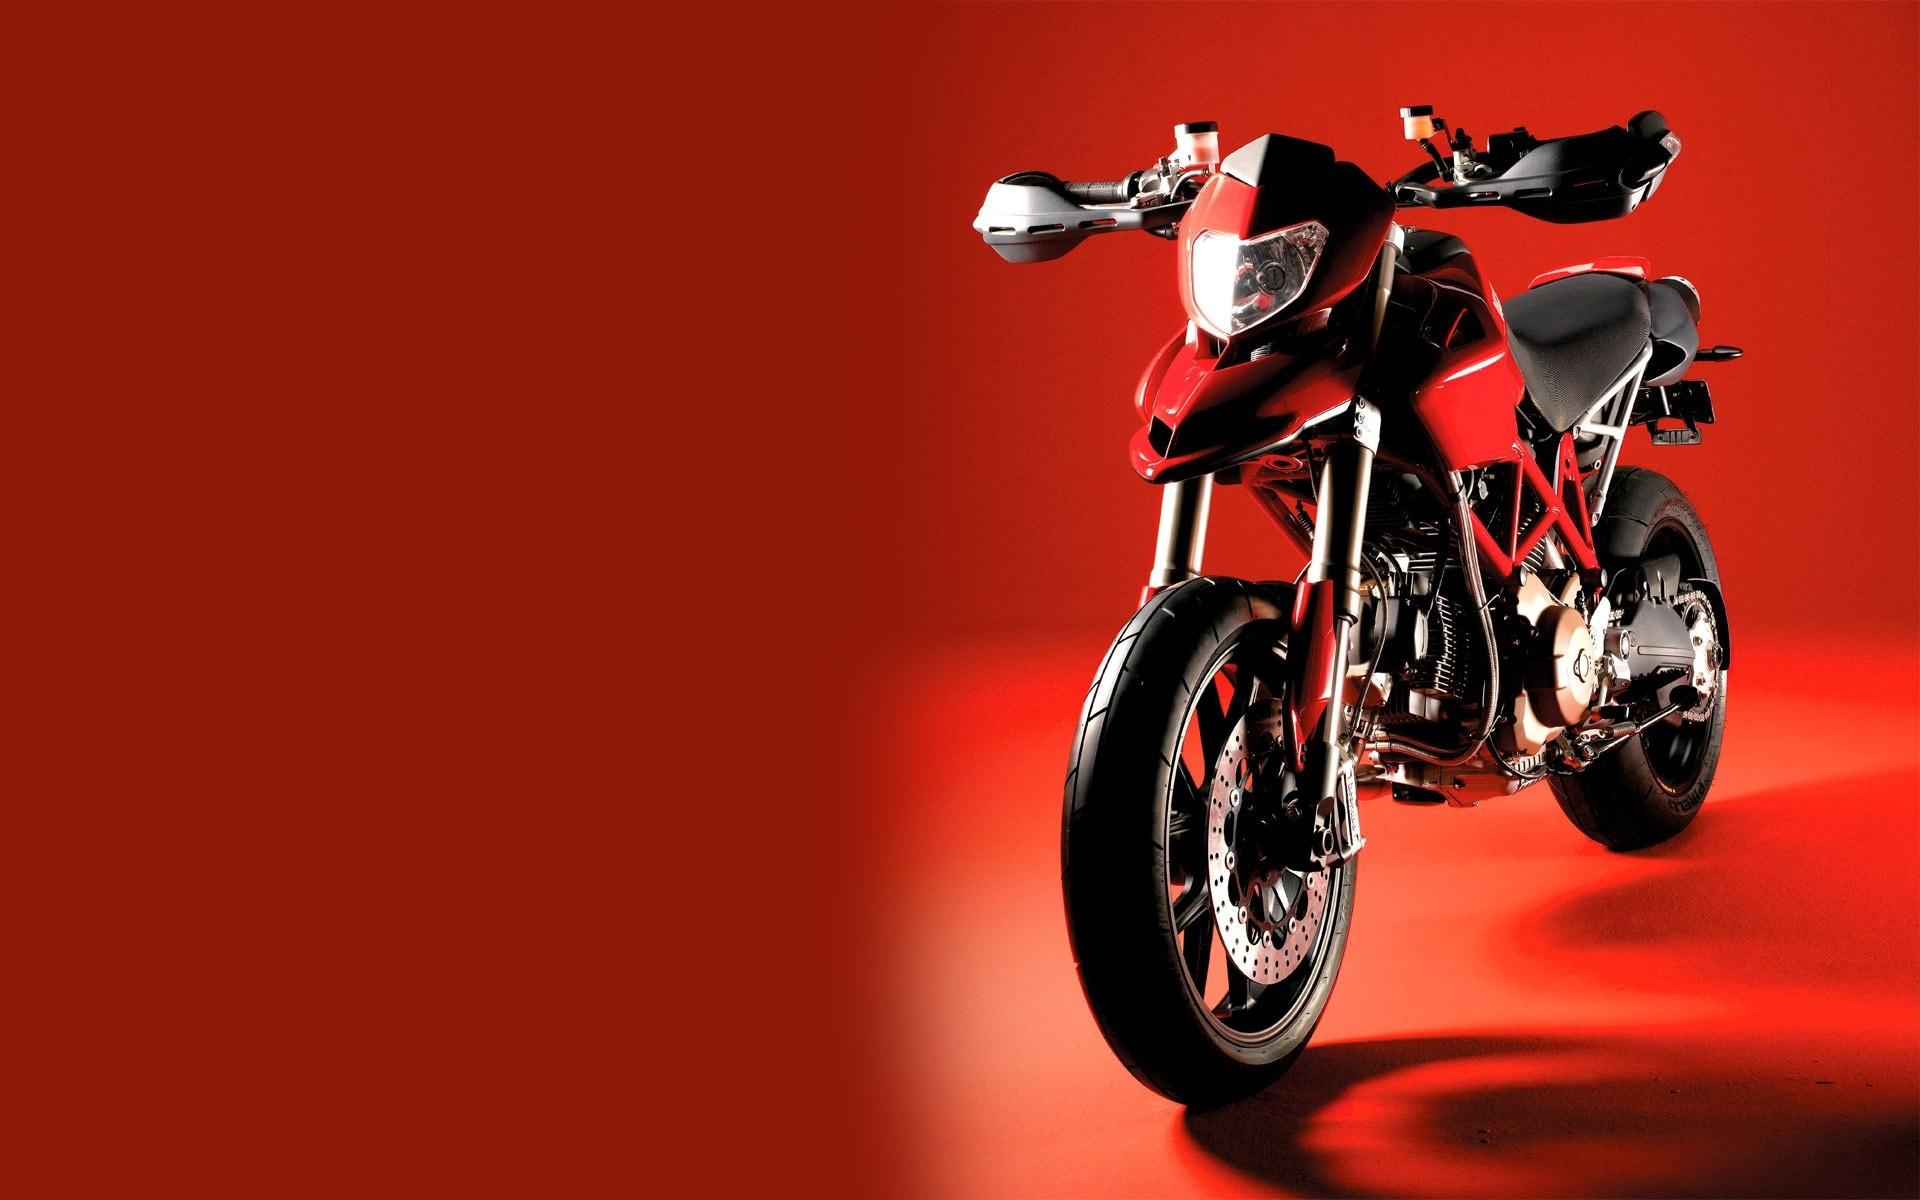 Ducati Hypermotard Red. iPhone wallpaper for free